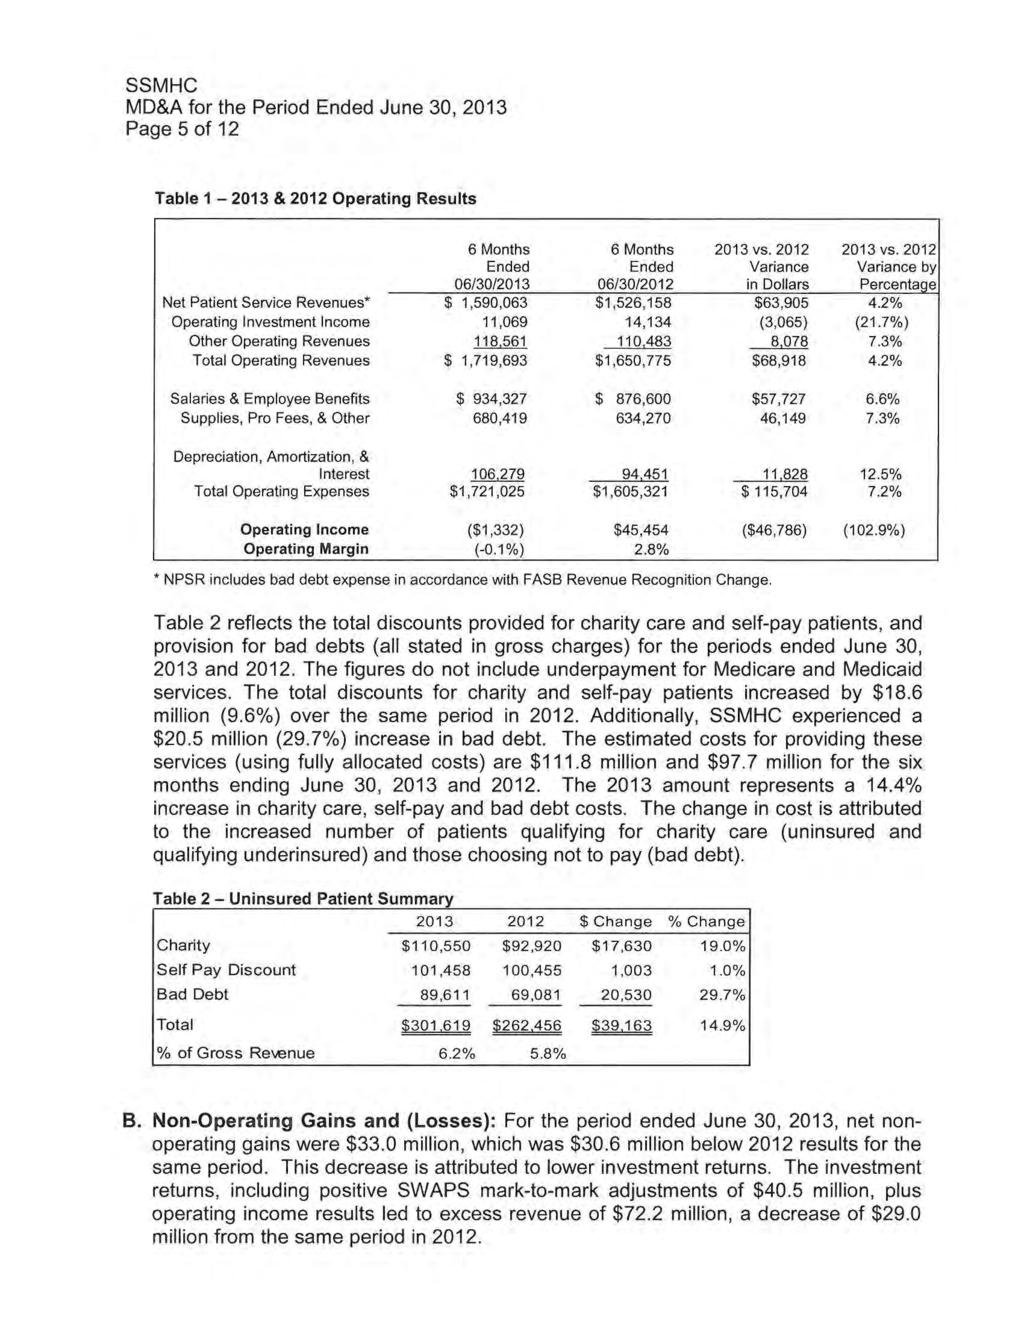 SSMHC MD&A for the Period Ended June 30, 2013 Page 5 of 12 Table 1-2013 & 2012 Operating Results 6 Months Ended 06/30/2013 Net Patient Service Revenues* $ 1,590,063 Operating Investment Income 11,069